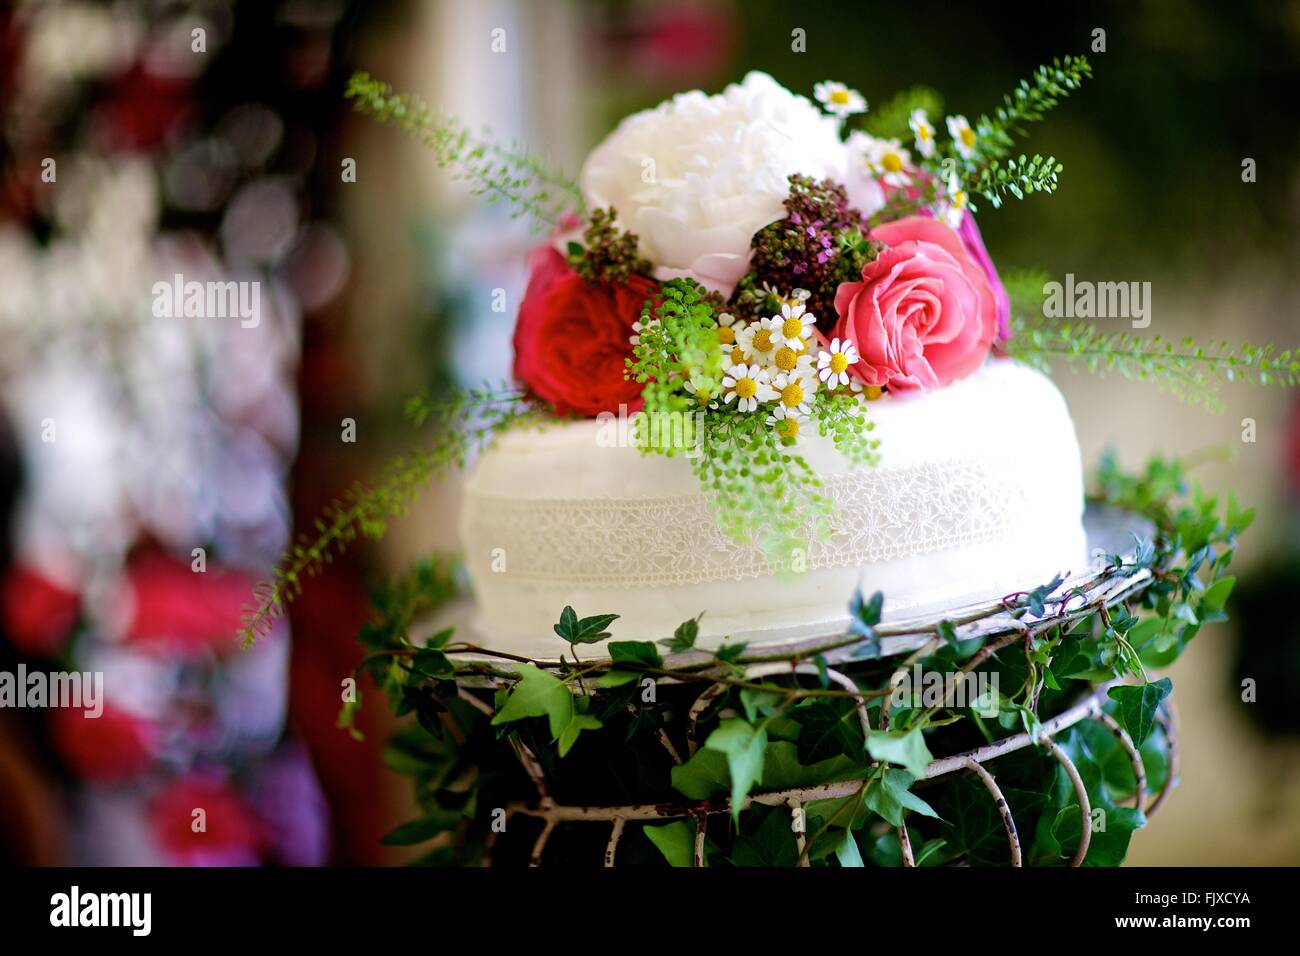 Wedding, Event, Banquet or special occasion table decoration and flowers, bride, groom, daisies and roses Stock Photo